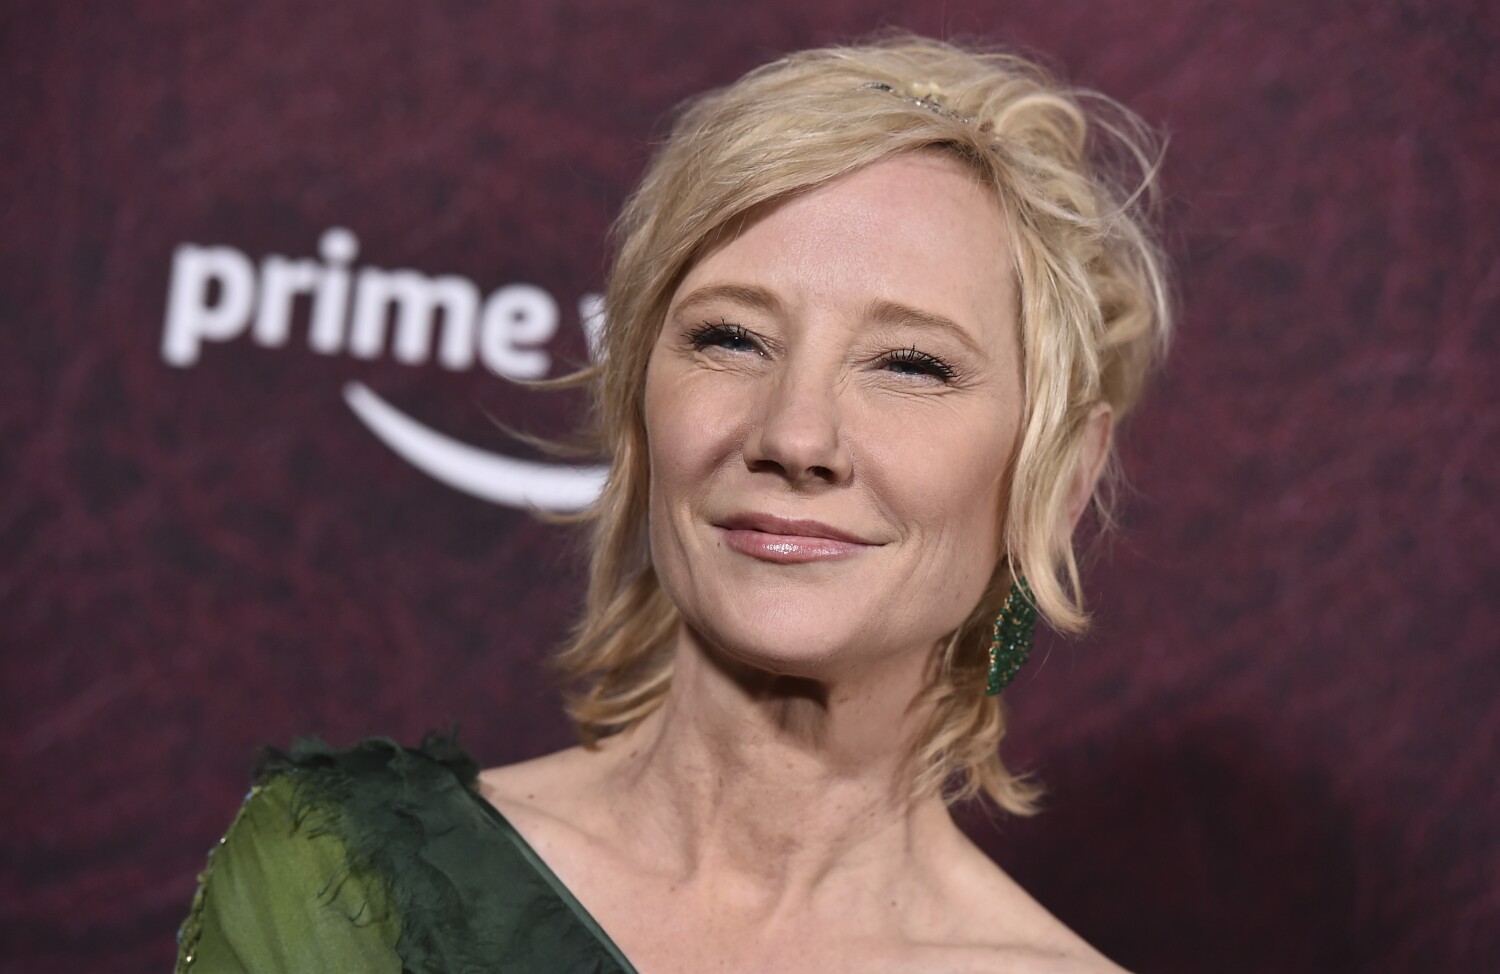 LAPD investigates actor Anne Heche in possible DUI and hit-and-run